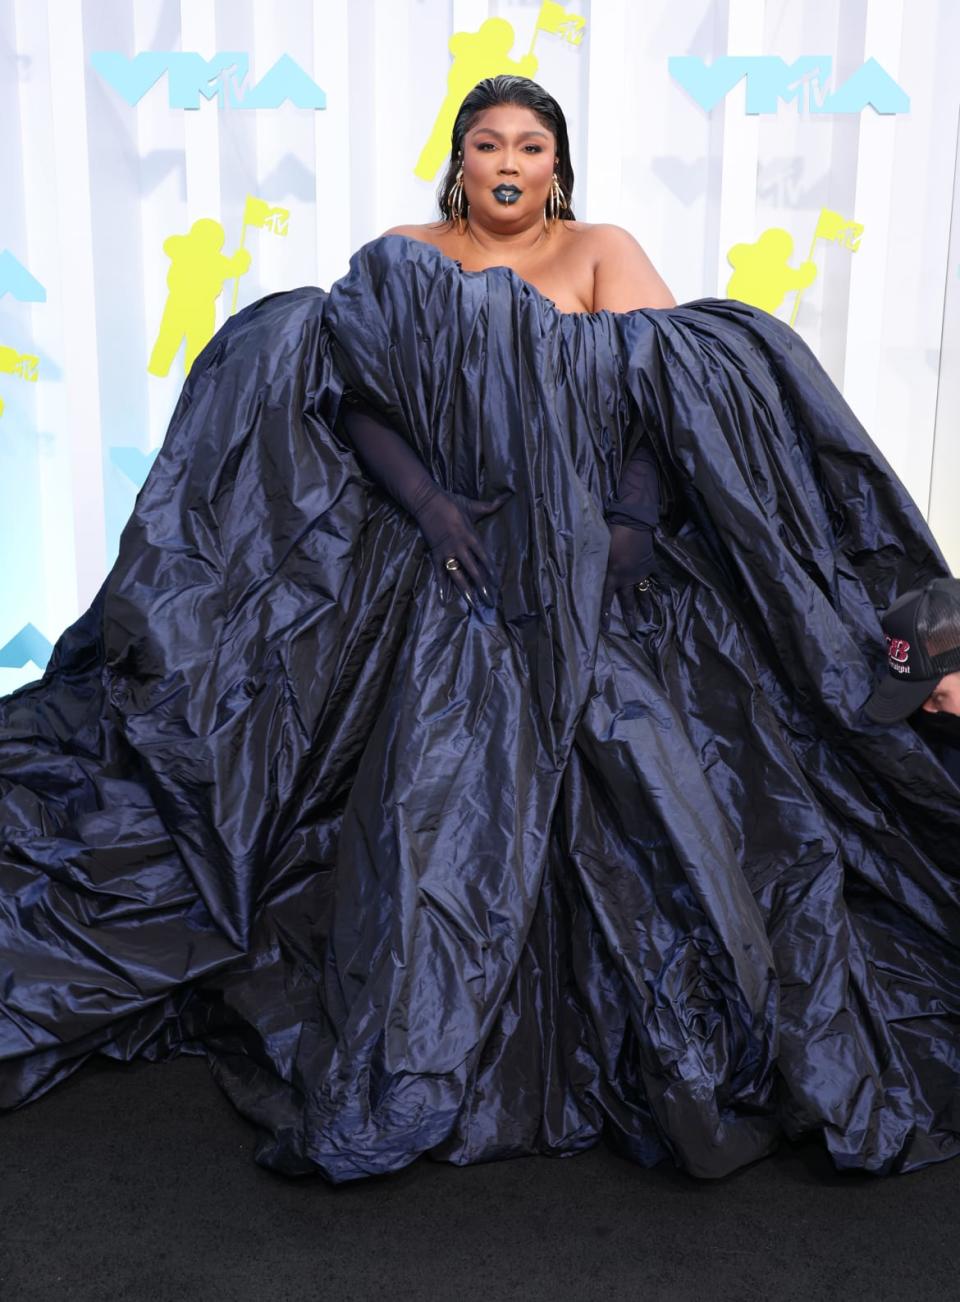 <div class="inline-image__title">Lizzo</div> <div class="inline-image__caption"><p>Lizzo in swathes of luxuriant Jean Paul Gaultier Couture.</p></div> <div class="inline-image__credit">Cindy Ord/WireImage/Getty</div>